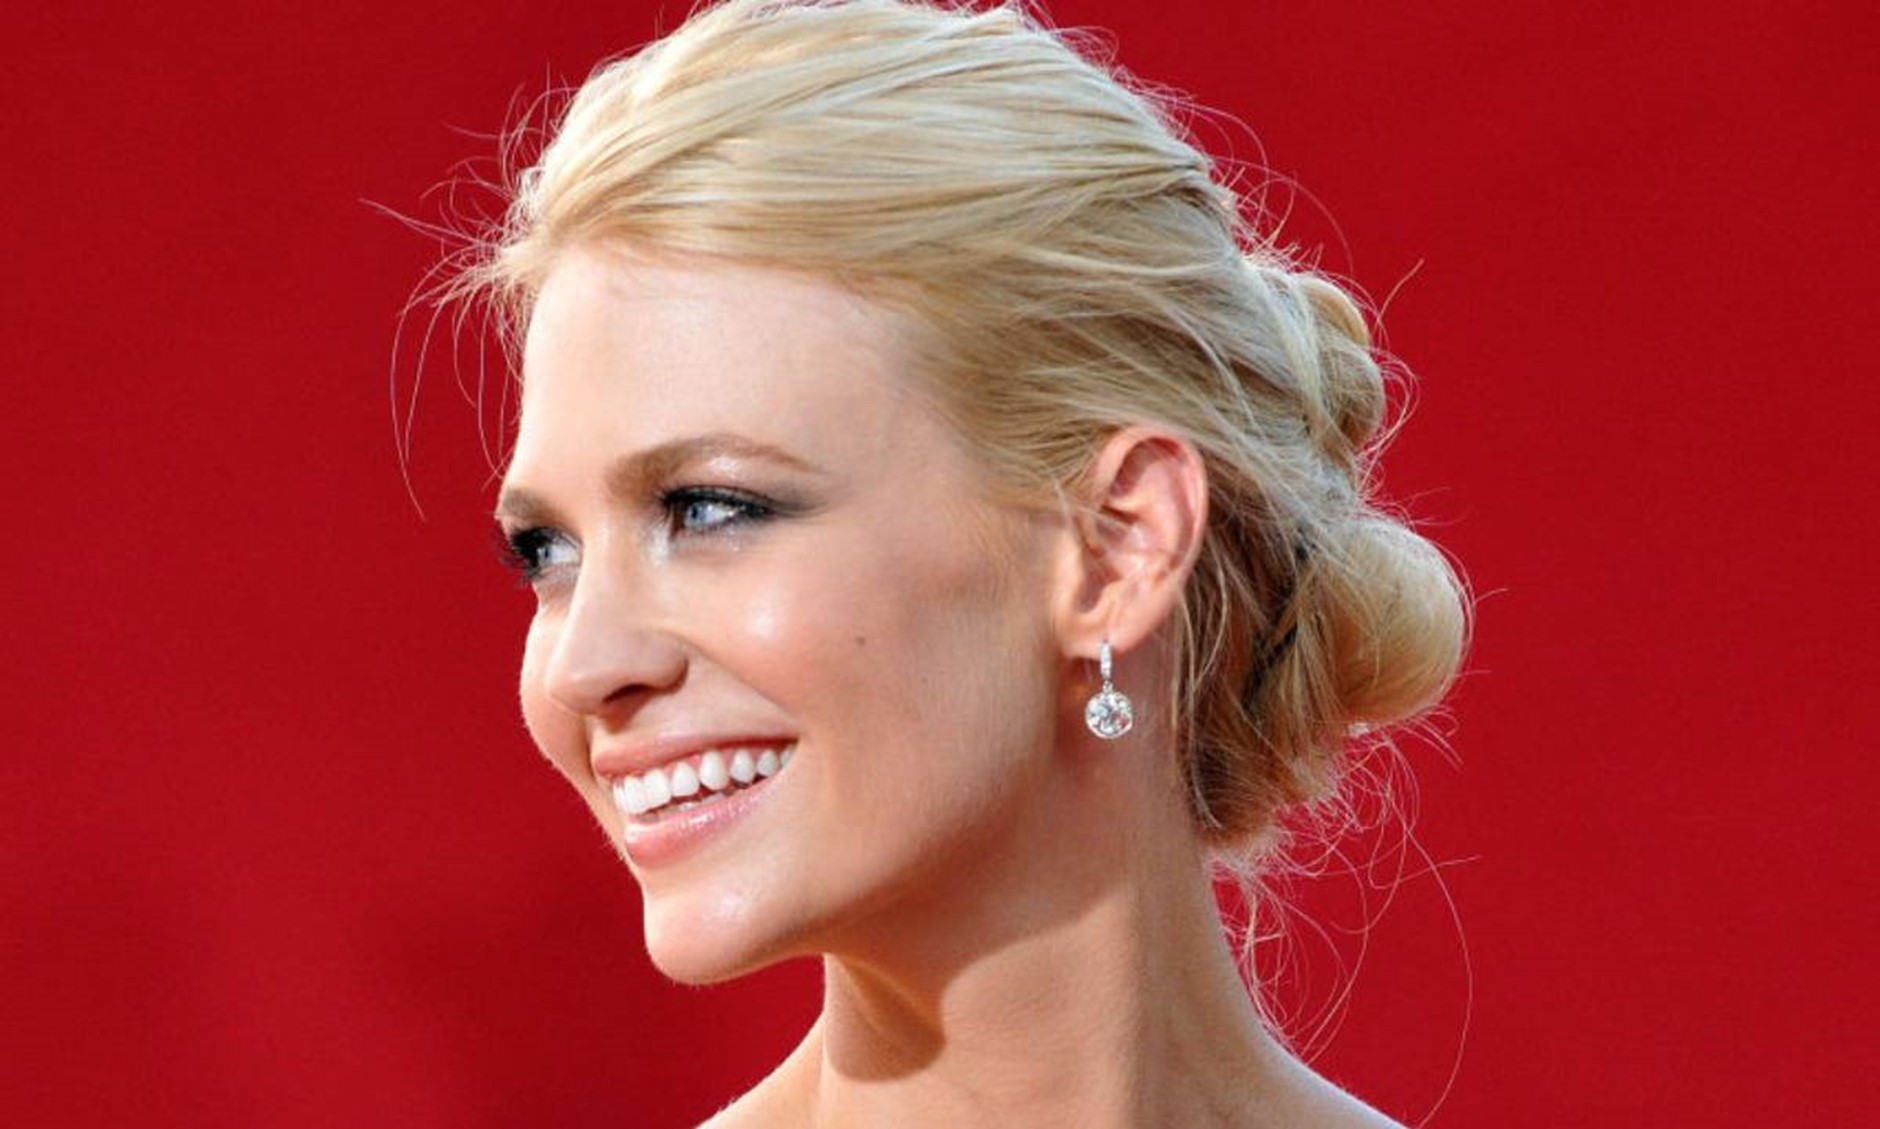 January Jones Boyfriend: Who is the actress dating?